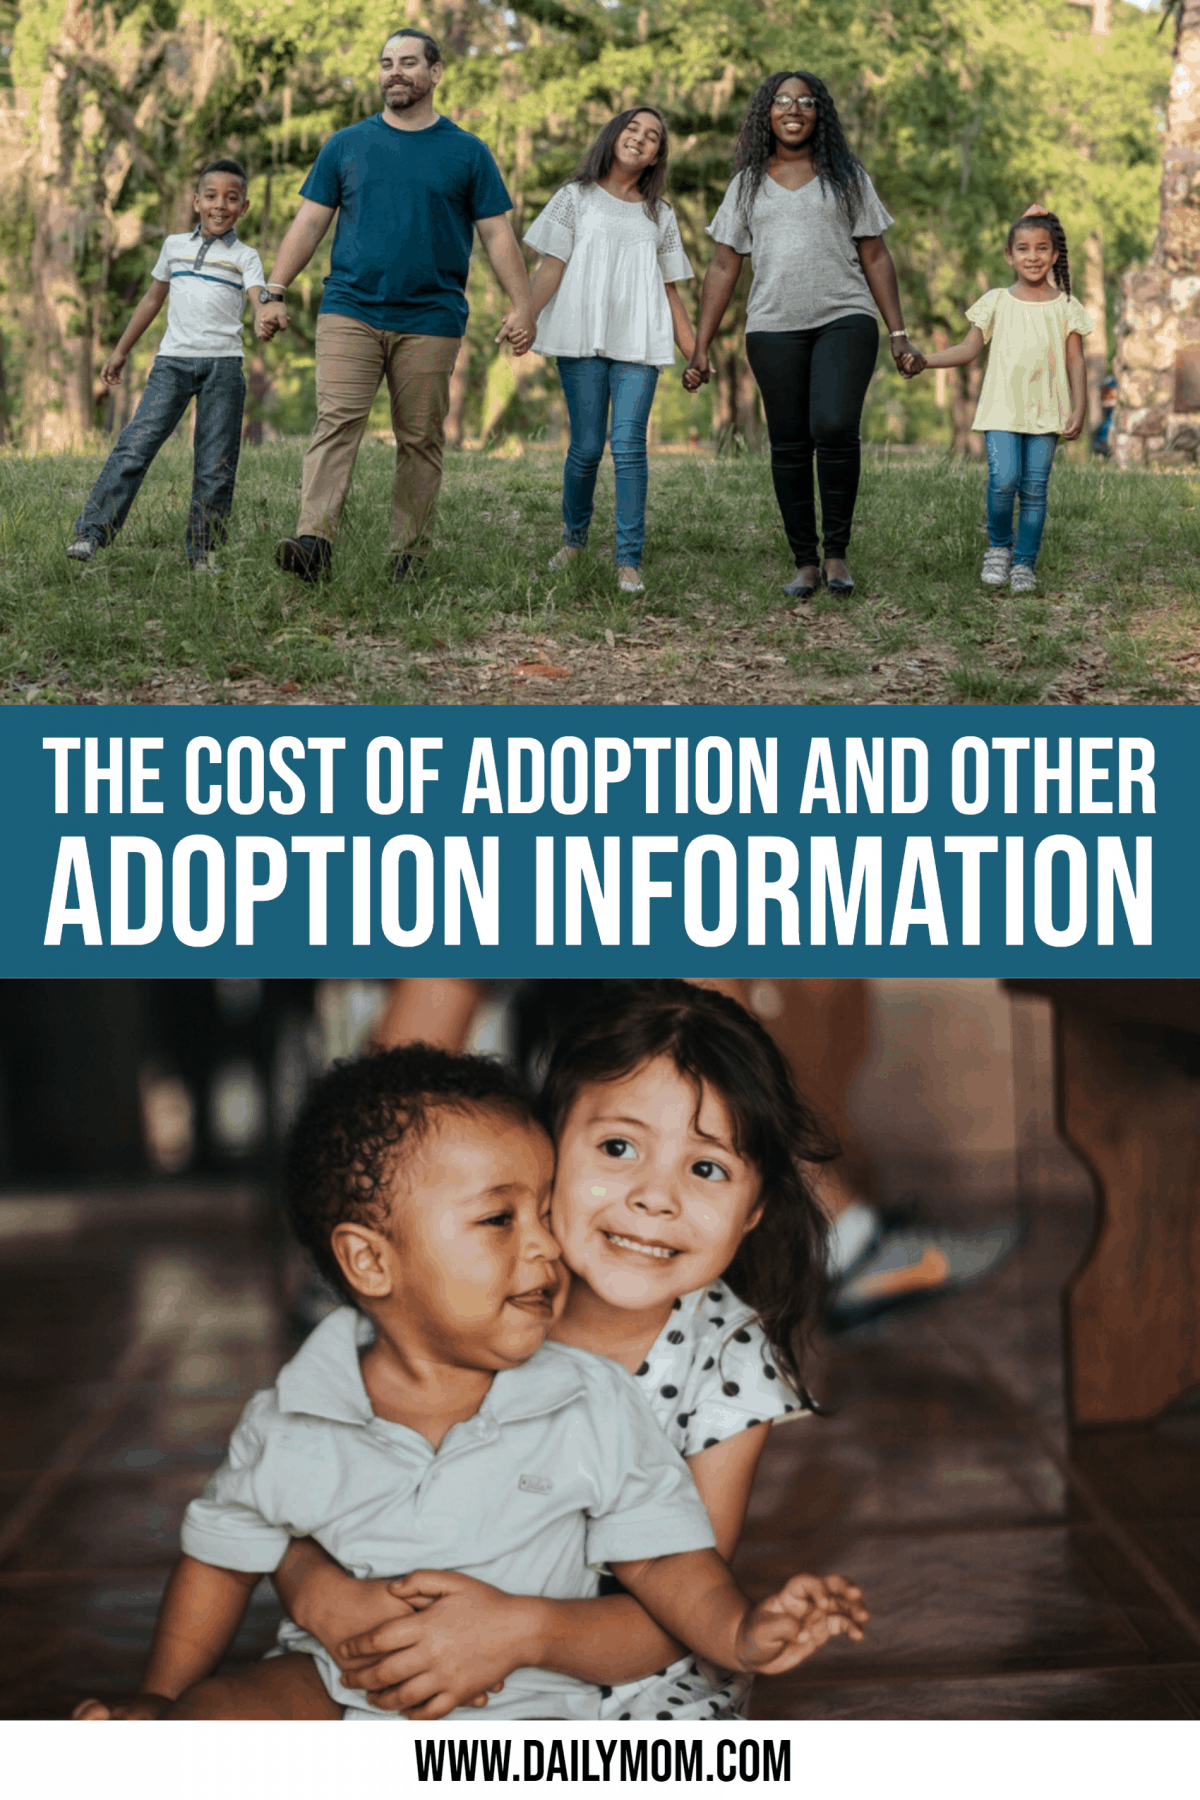 How Much Does It Cost To Adopt A Child And Other Common Adoption Questions Answered